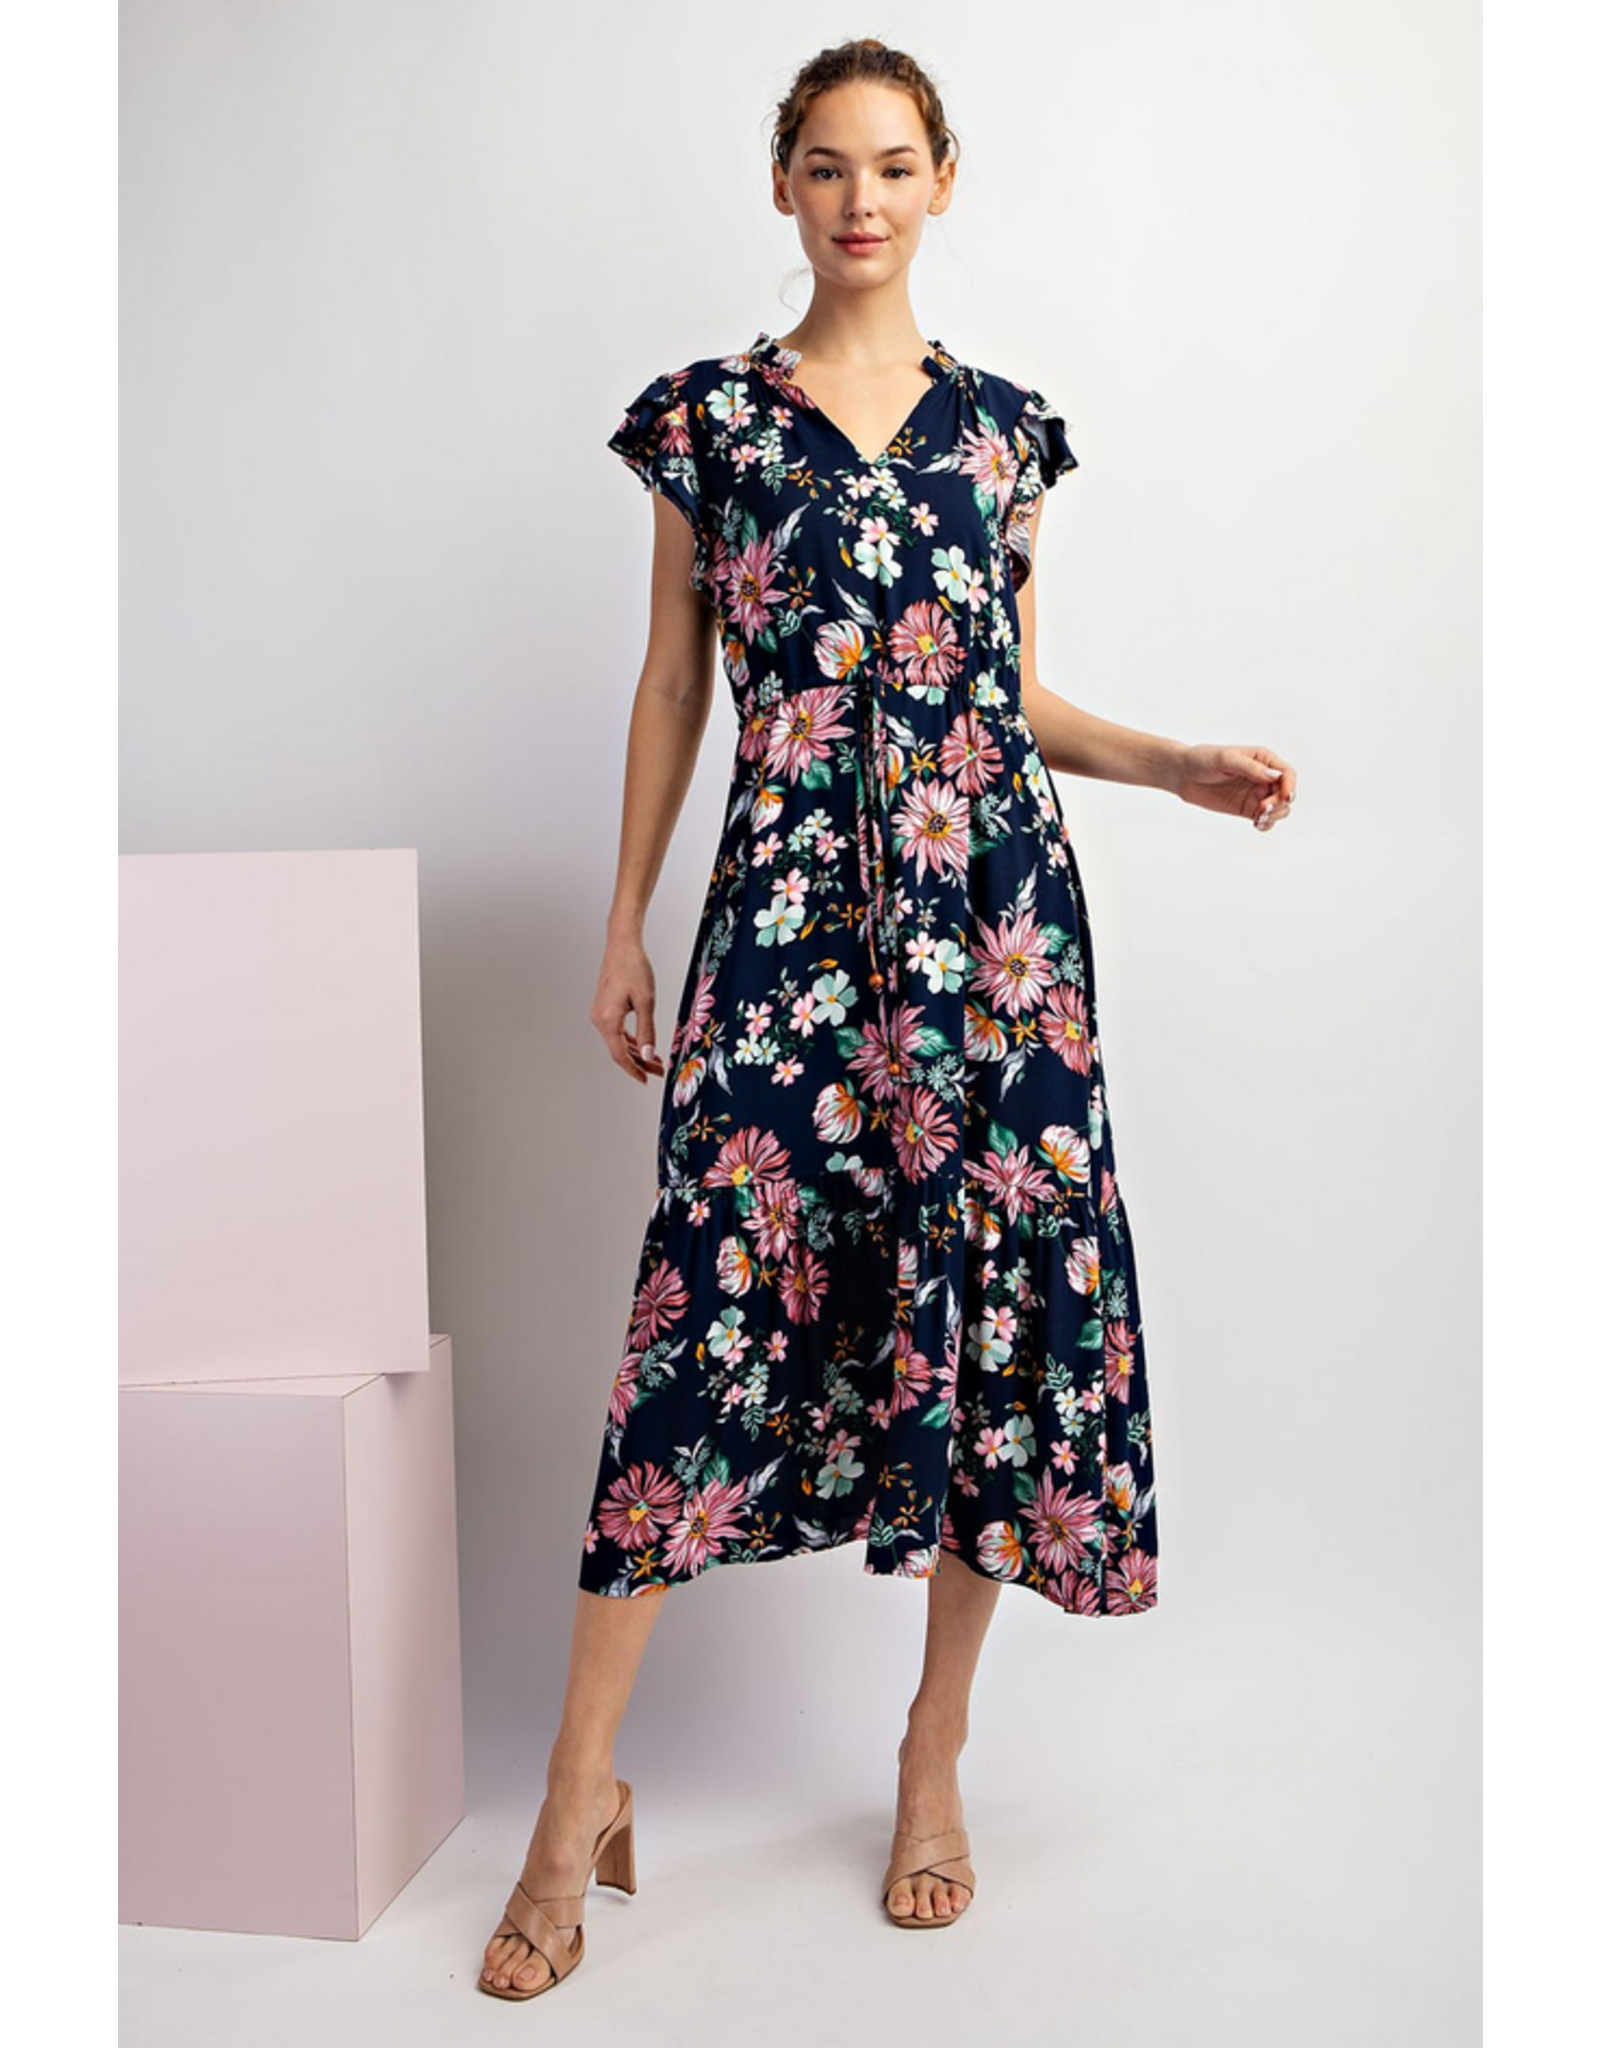 eesome Navy Floral Printed Midi Dress